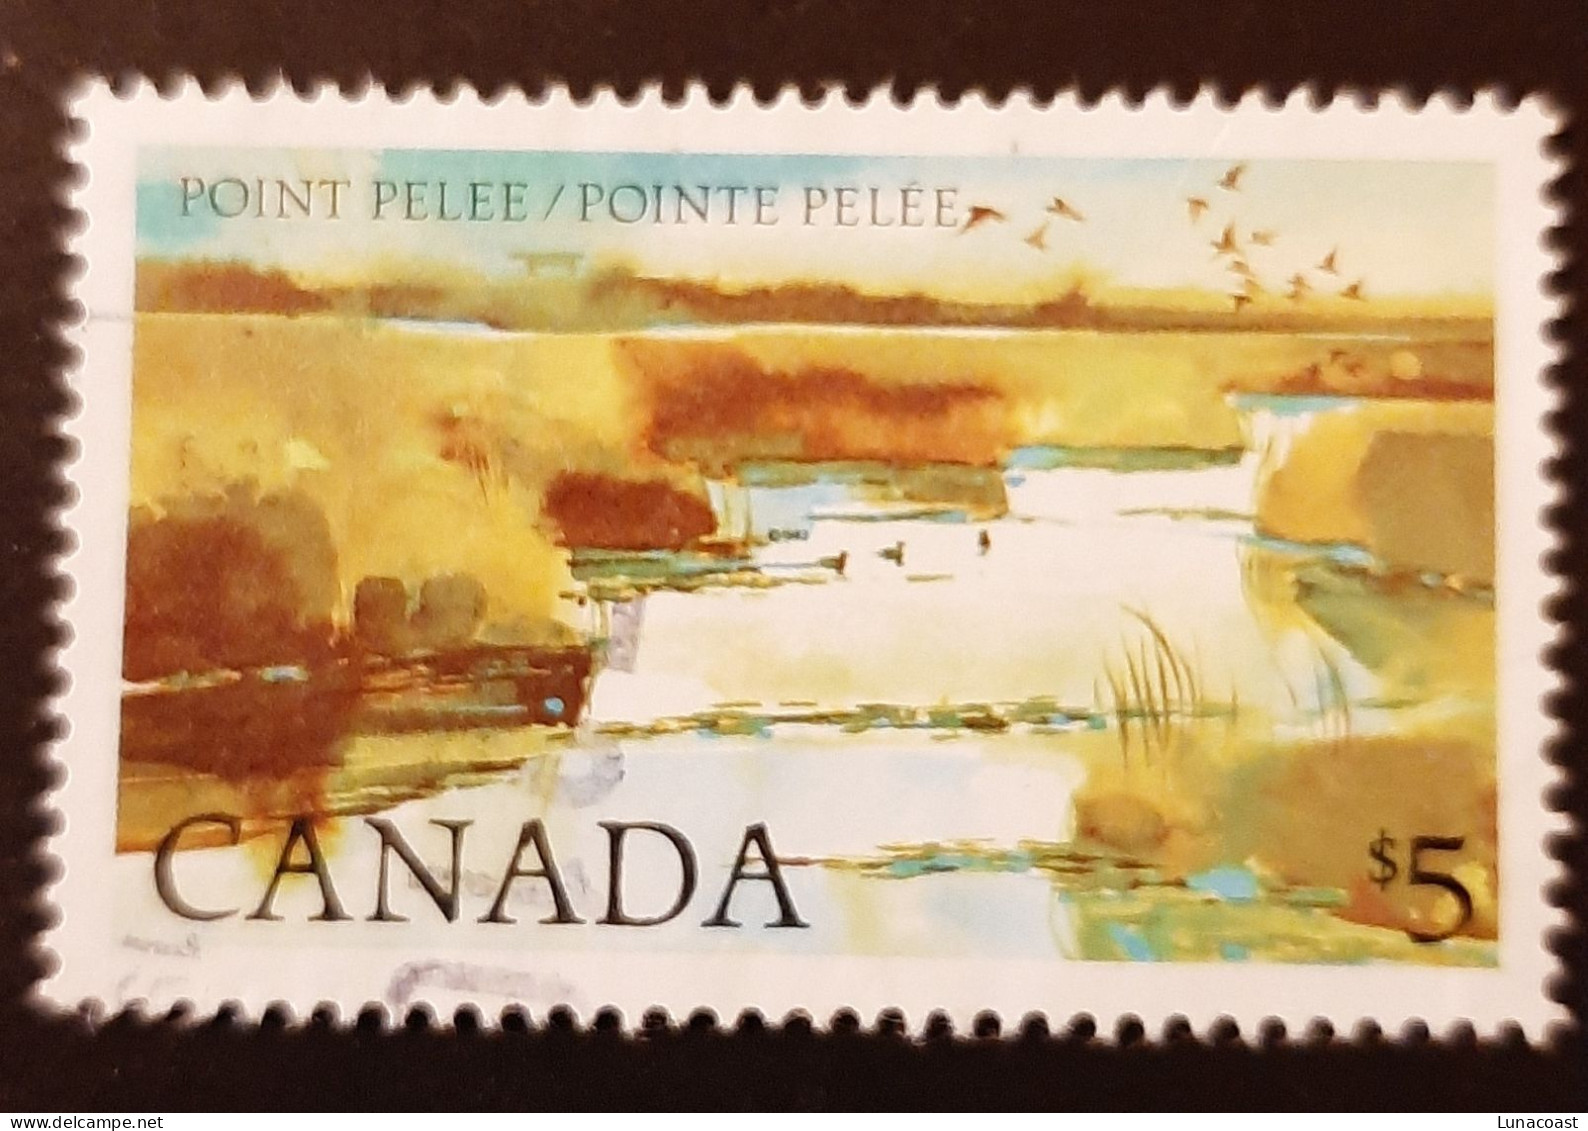 Canada 1983  USED  Sc937,  5$ Point Pelee National Park - Used Stamps